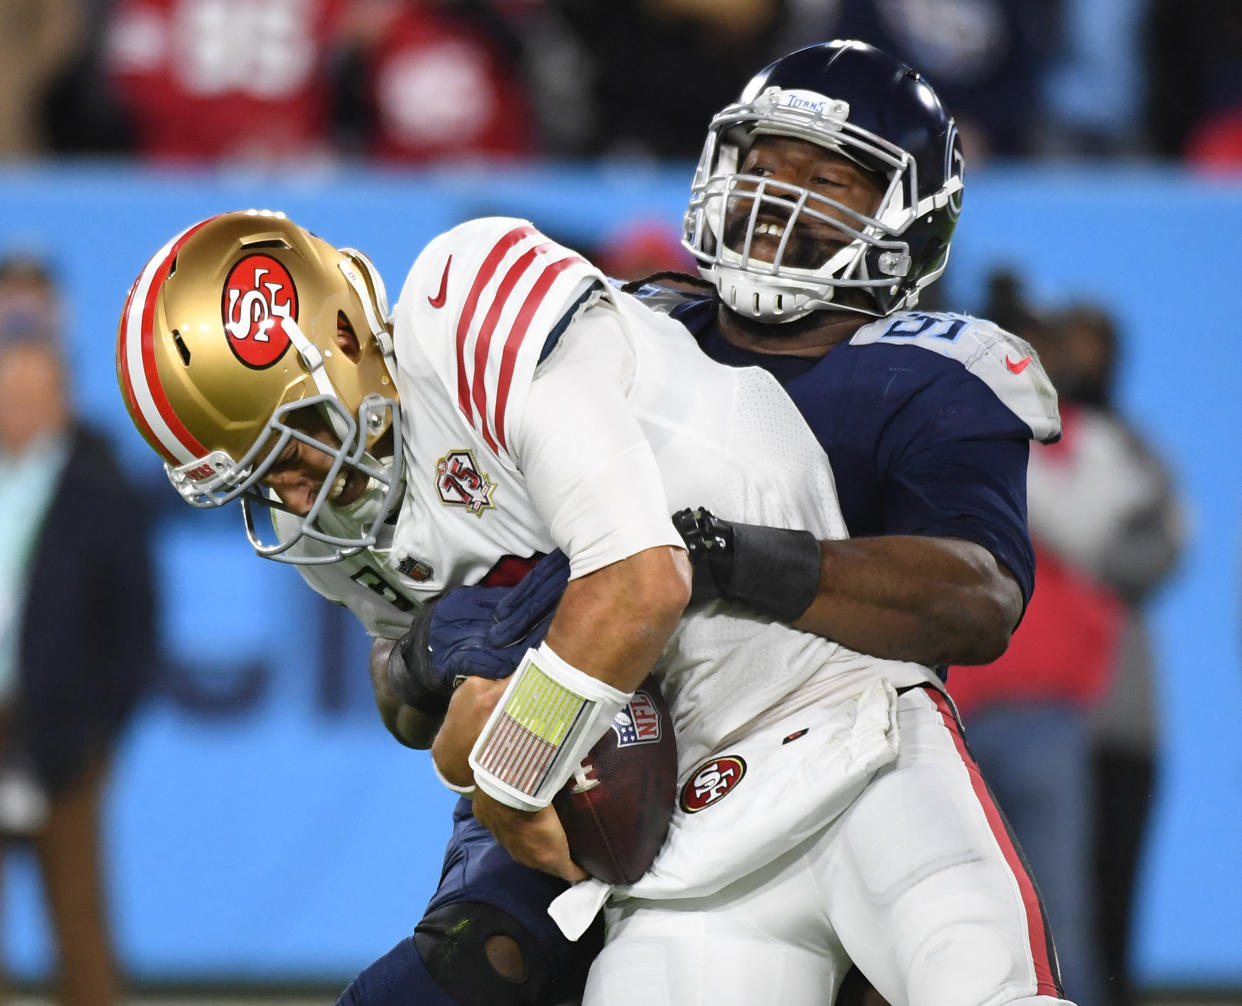 Dec 23, 2021; Nashville, Tennessee, USA; San Francisco 49ers quarterback Jimmy Garoppolo (10) is sacked by Tennessee Titans defensive end Denico Autry (96) during the first half at Nissan Stadium. Mandatory Credit: Christopher Hanewinckel-USA TODAY Sports